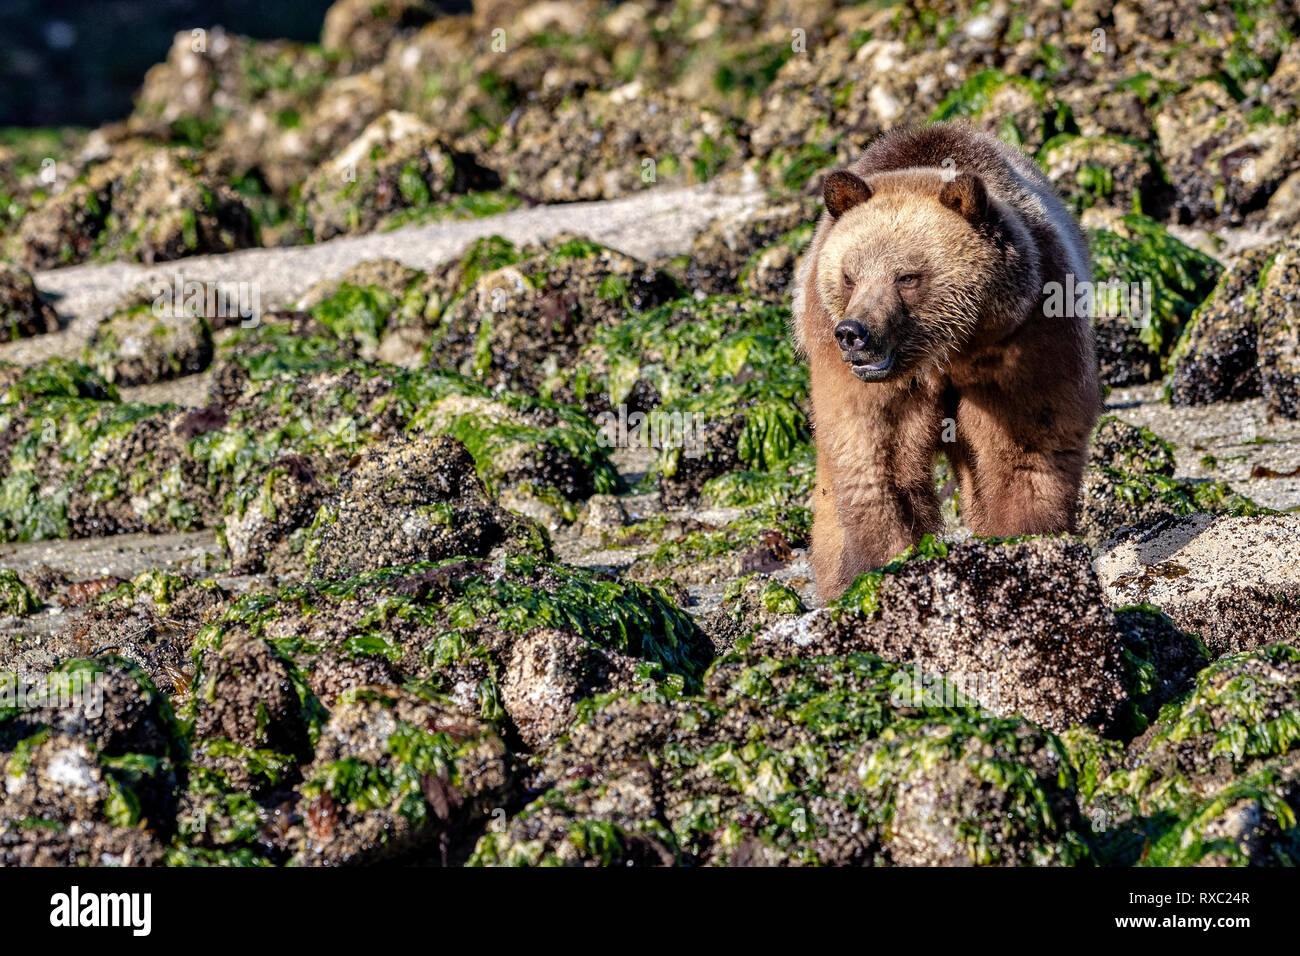 Grizzly bear foraging at low tide along the tideline in Knight Inlet, First Nations Territory, British Columbia, Canada Stock Photo